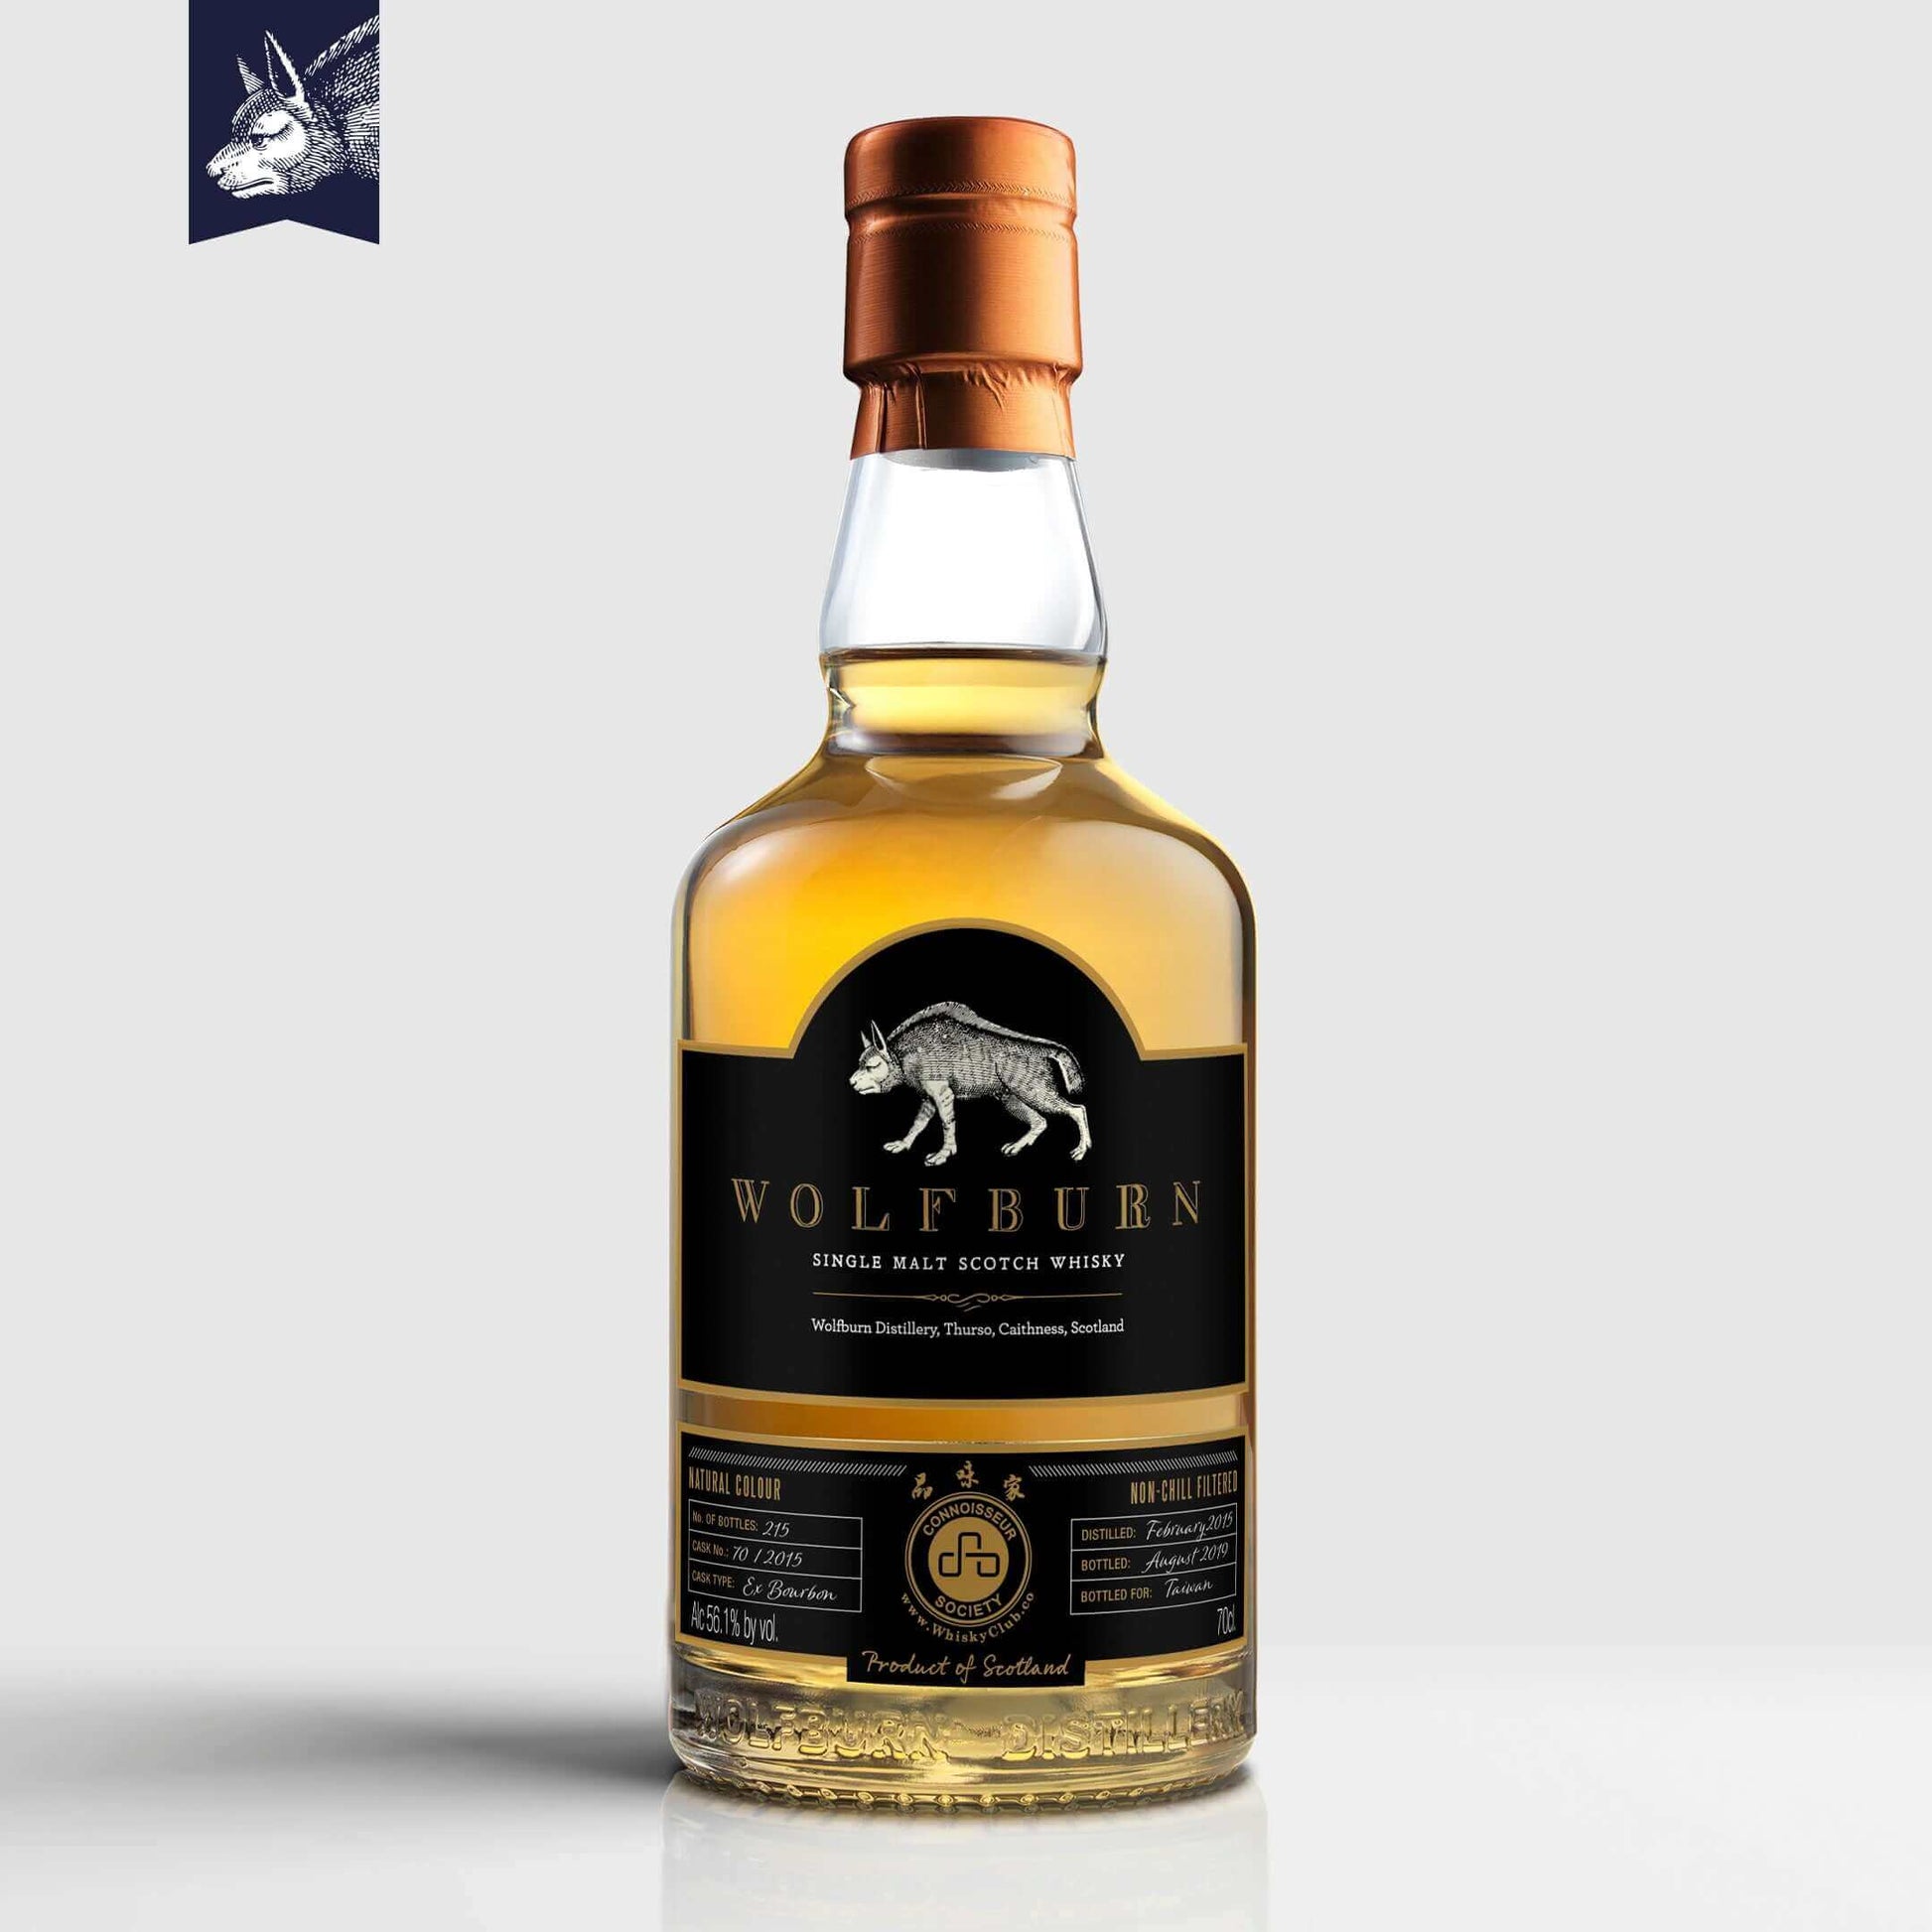 Wolfburn Connoisseur society Taiwan – 56.1% vol. 70cl